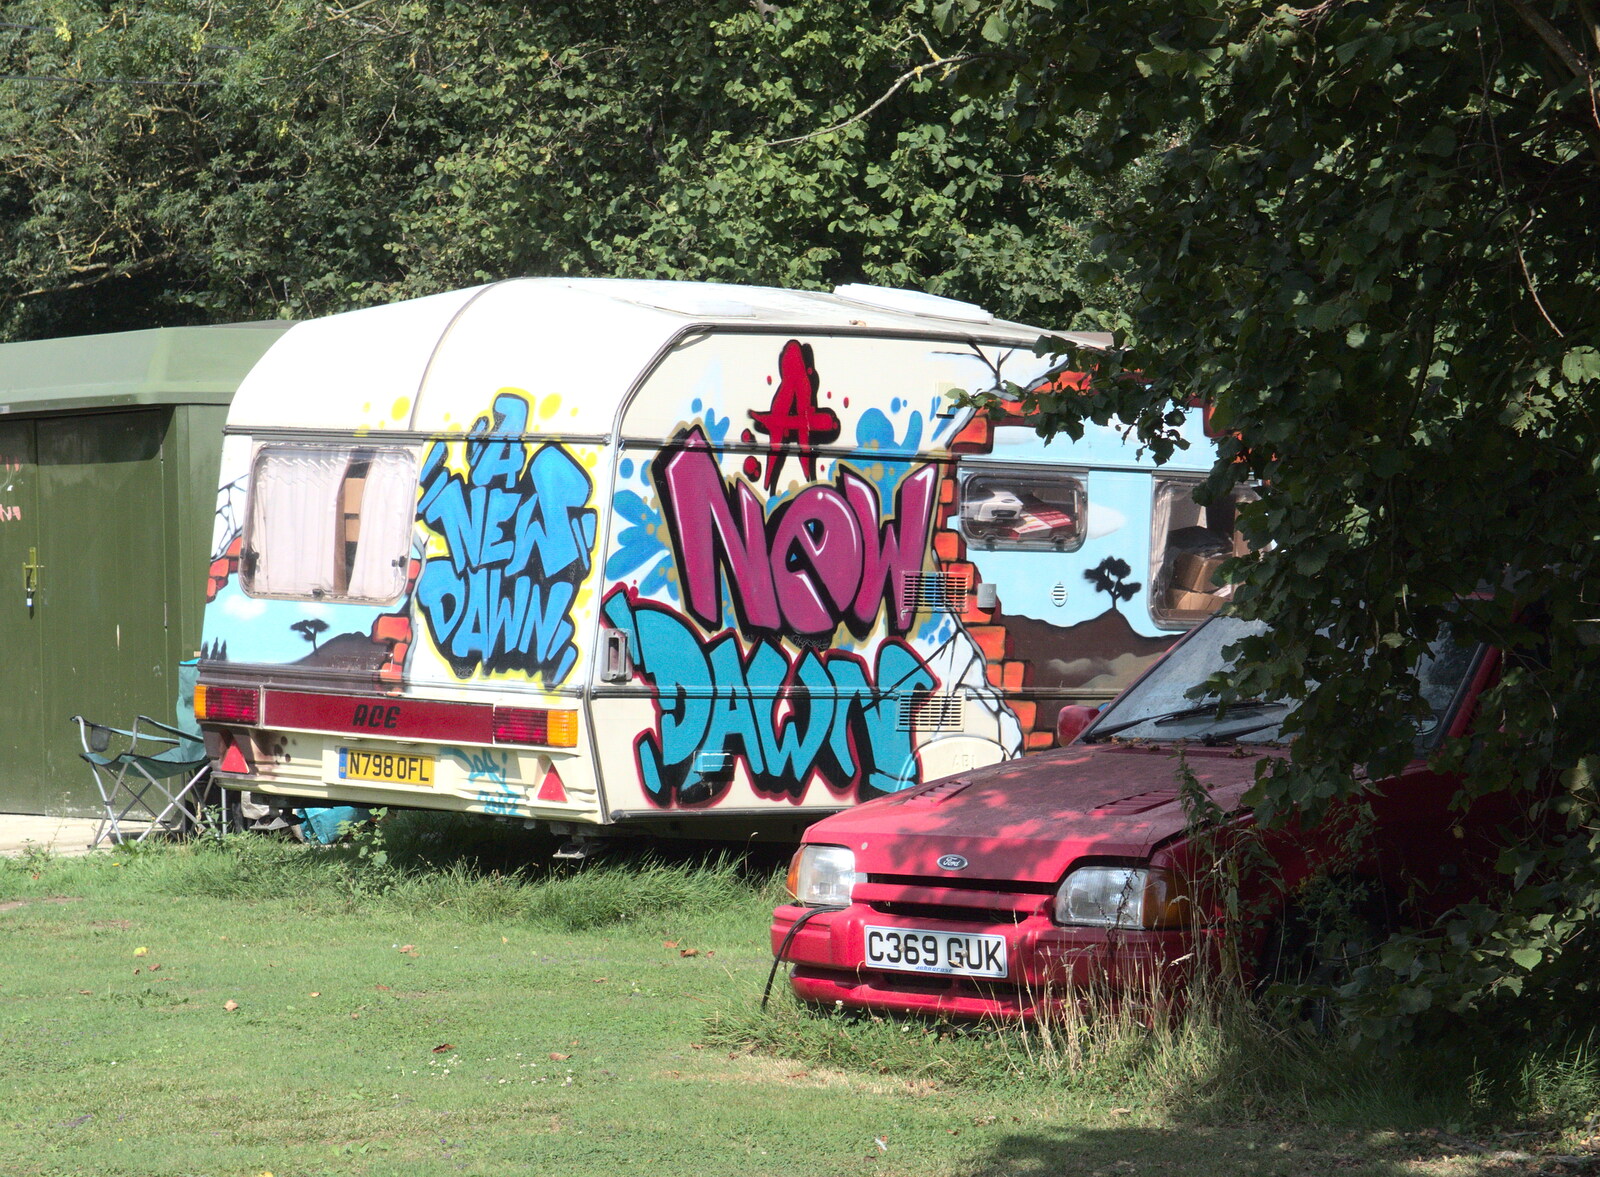 Next door's bizarre graffiti caravan re-appears from Fred's Cast and a SwiftKey Lunch, Waterloo, London - 18th August 2015